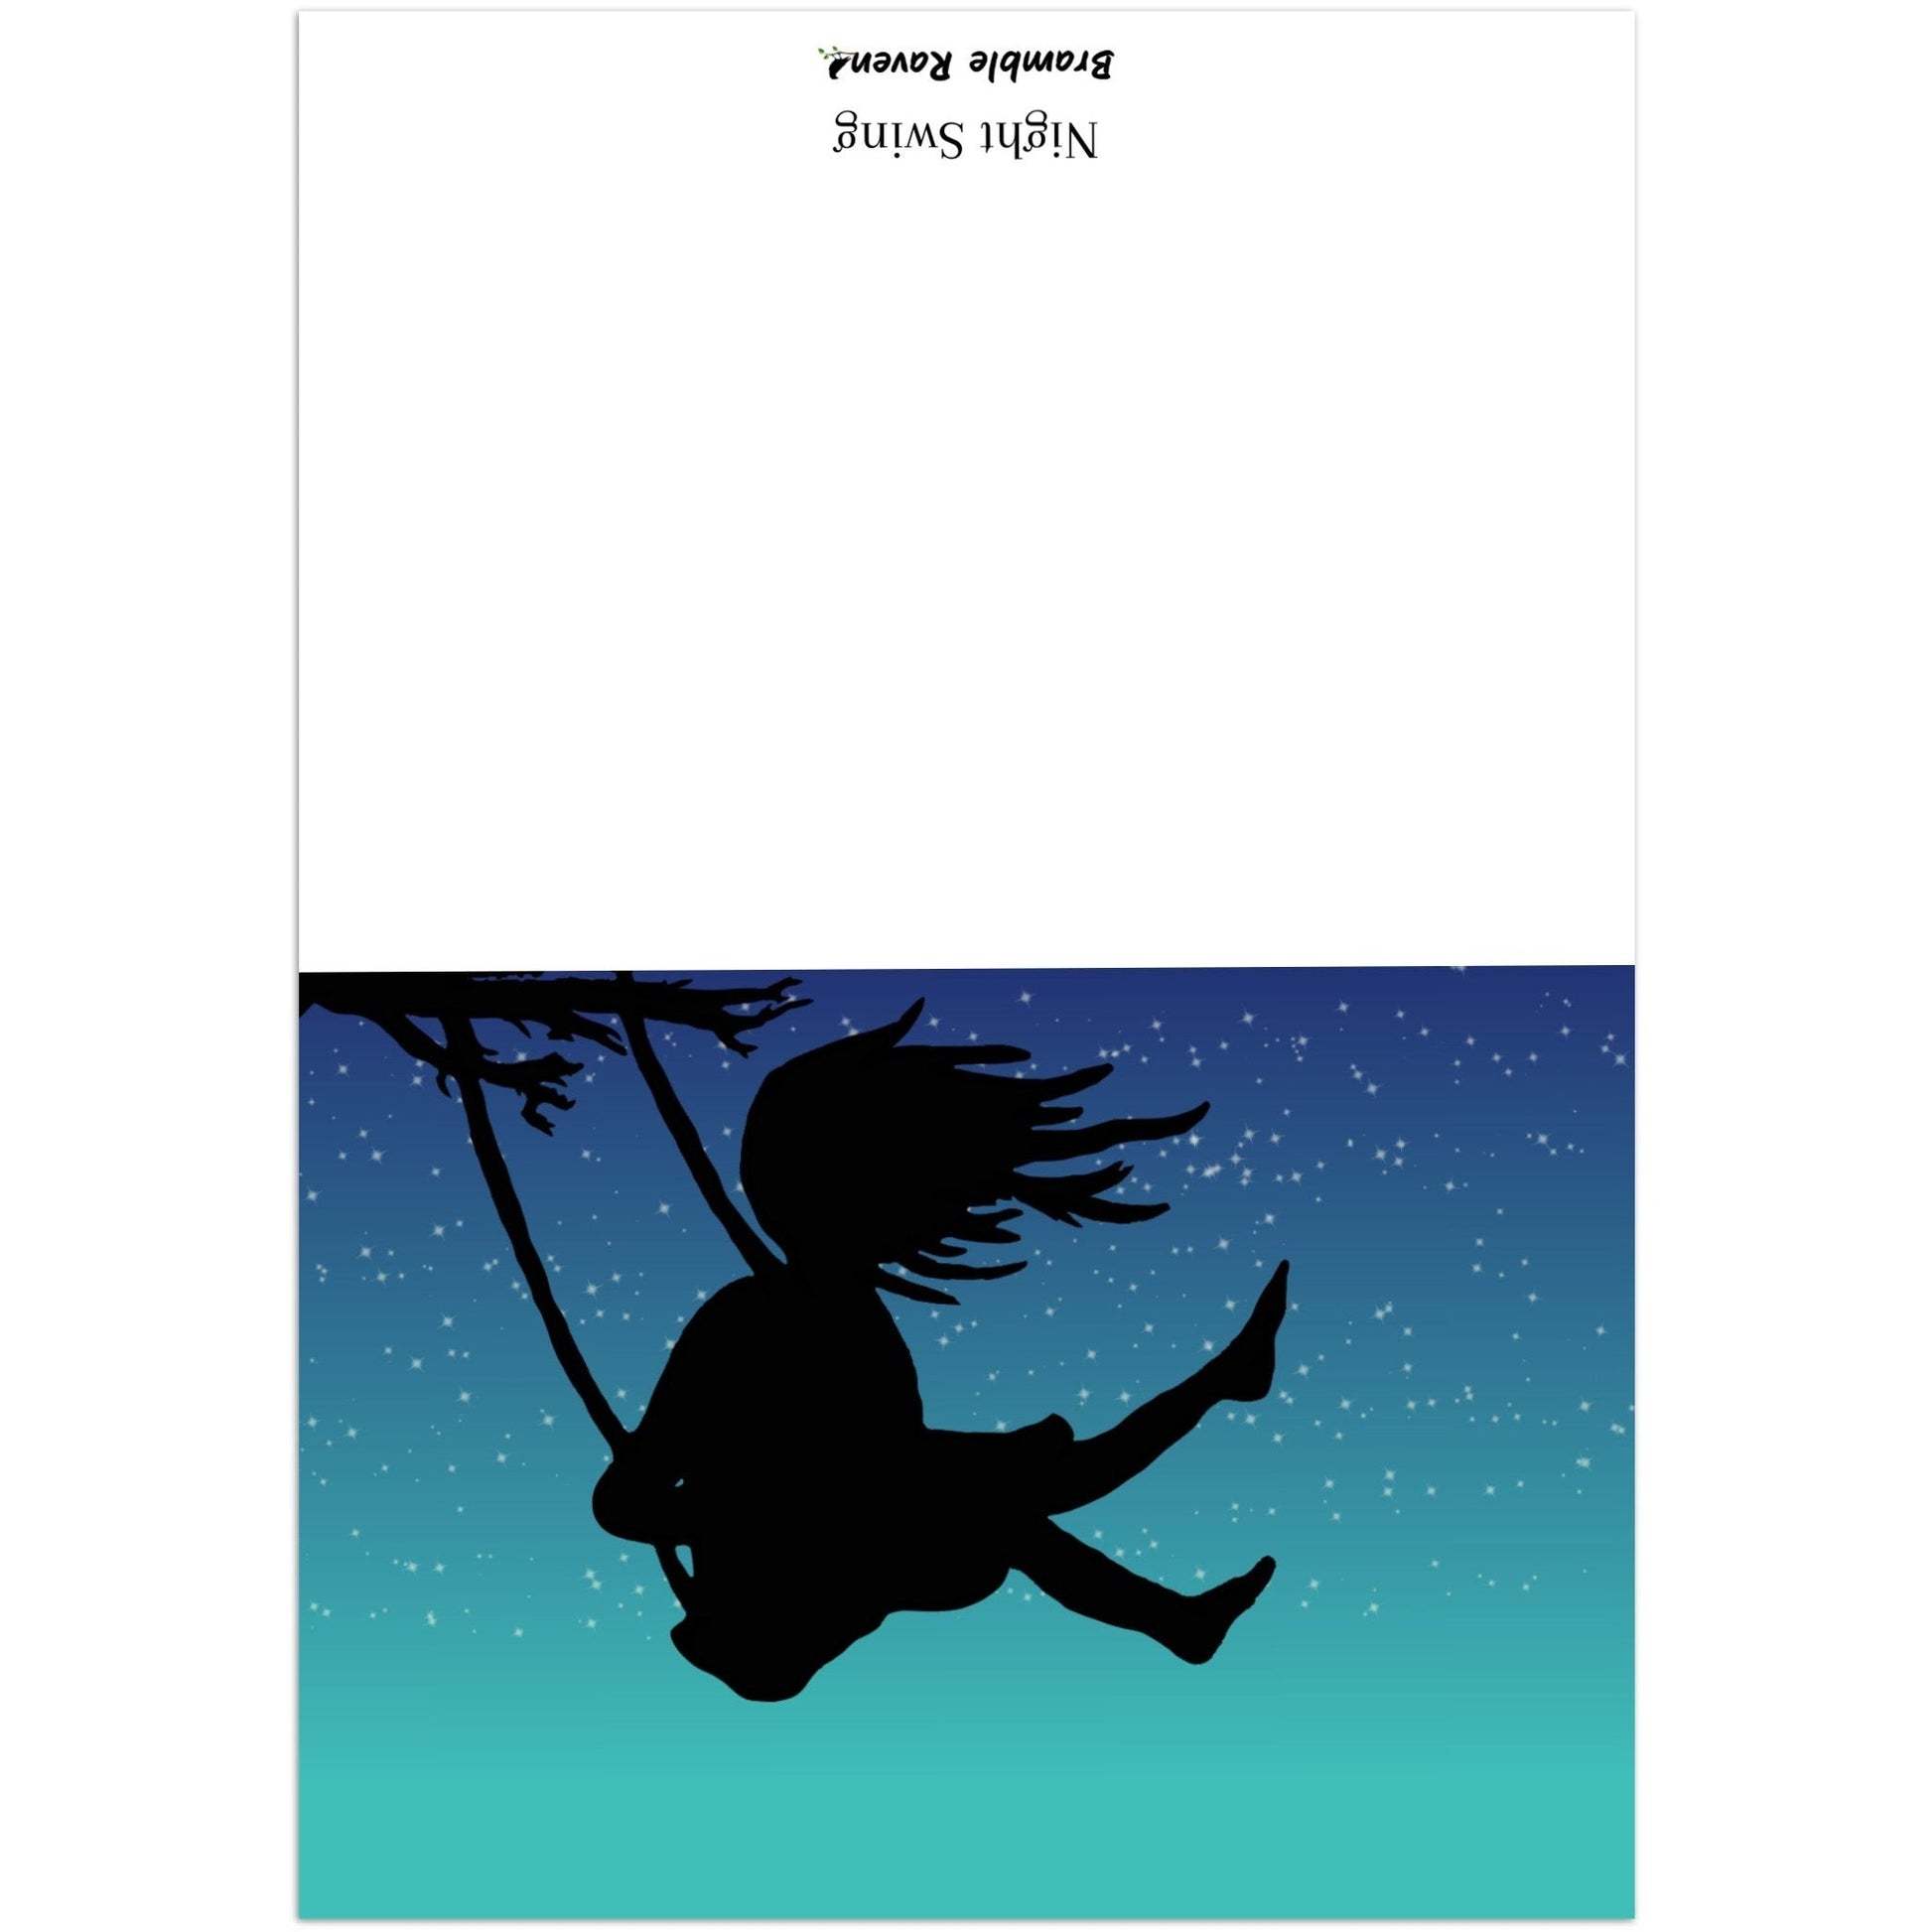 Pack of ten 5 by 7 inch Night Swing greeting cards and envelopes. Front shows silhouette of a girl in a tree swing against a starry summer night sky. Inside is blank. 